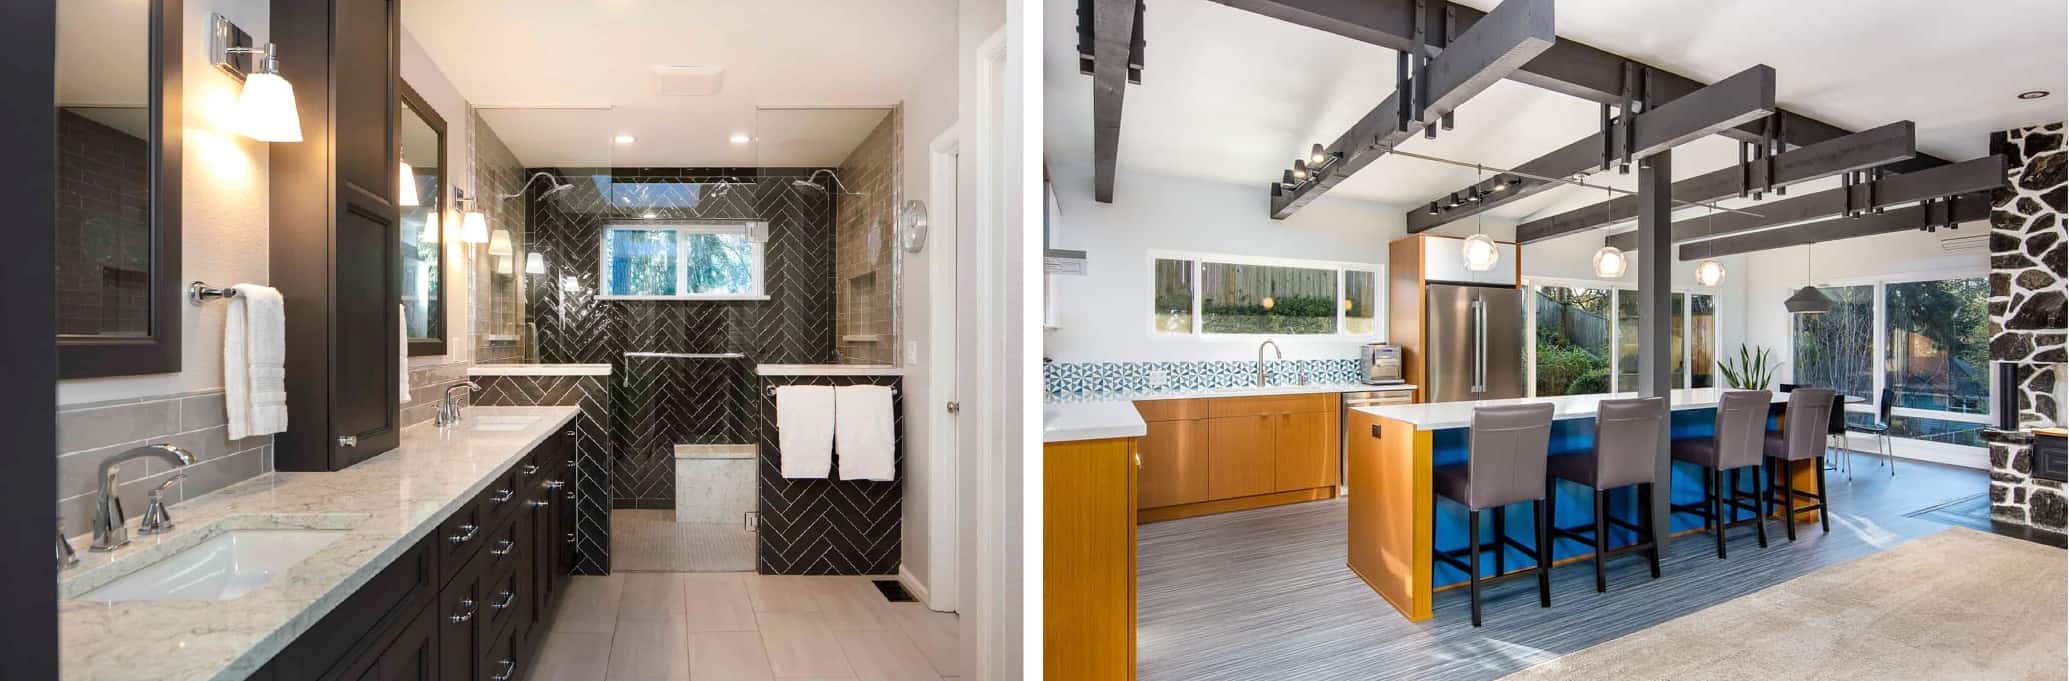 Remodeled bathroom and a remodeled kitchen in Seattle.